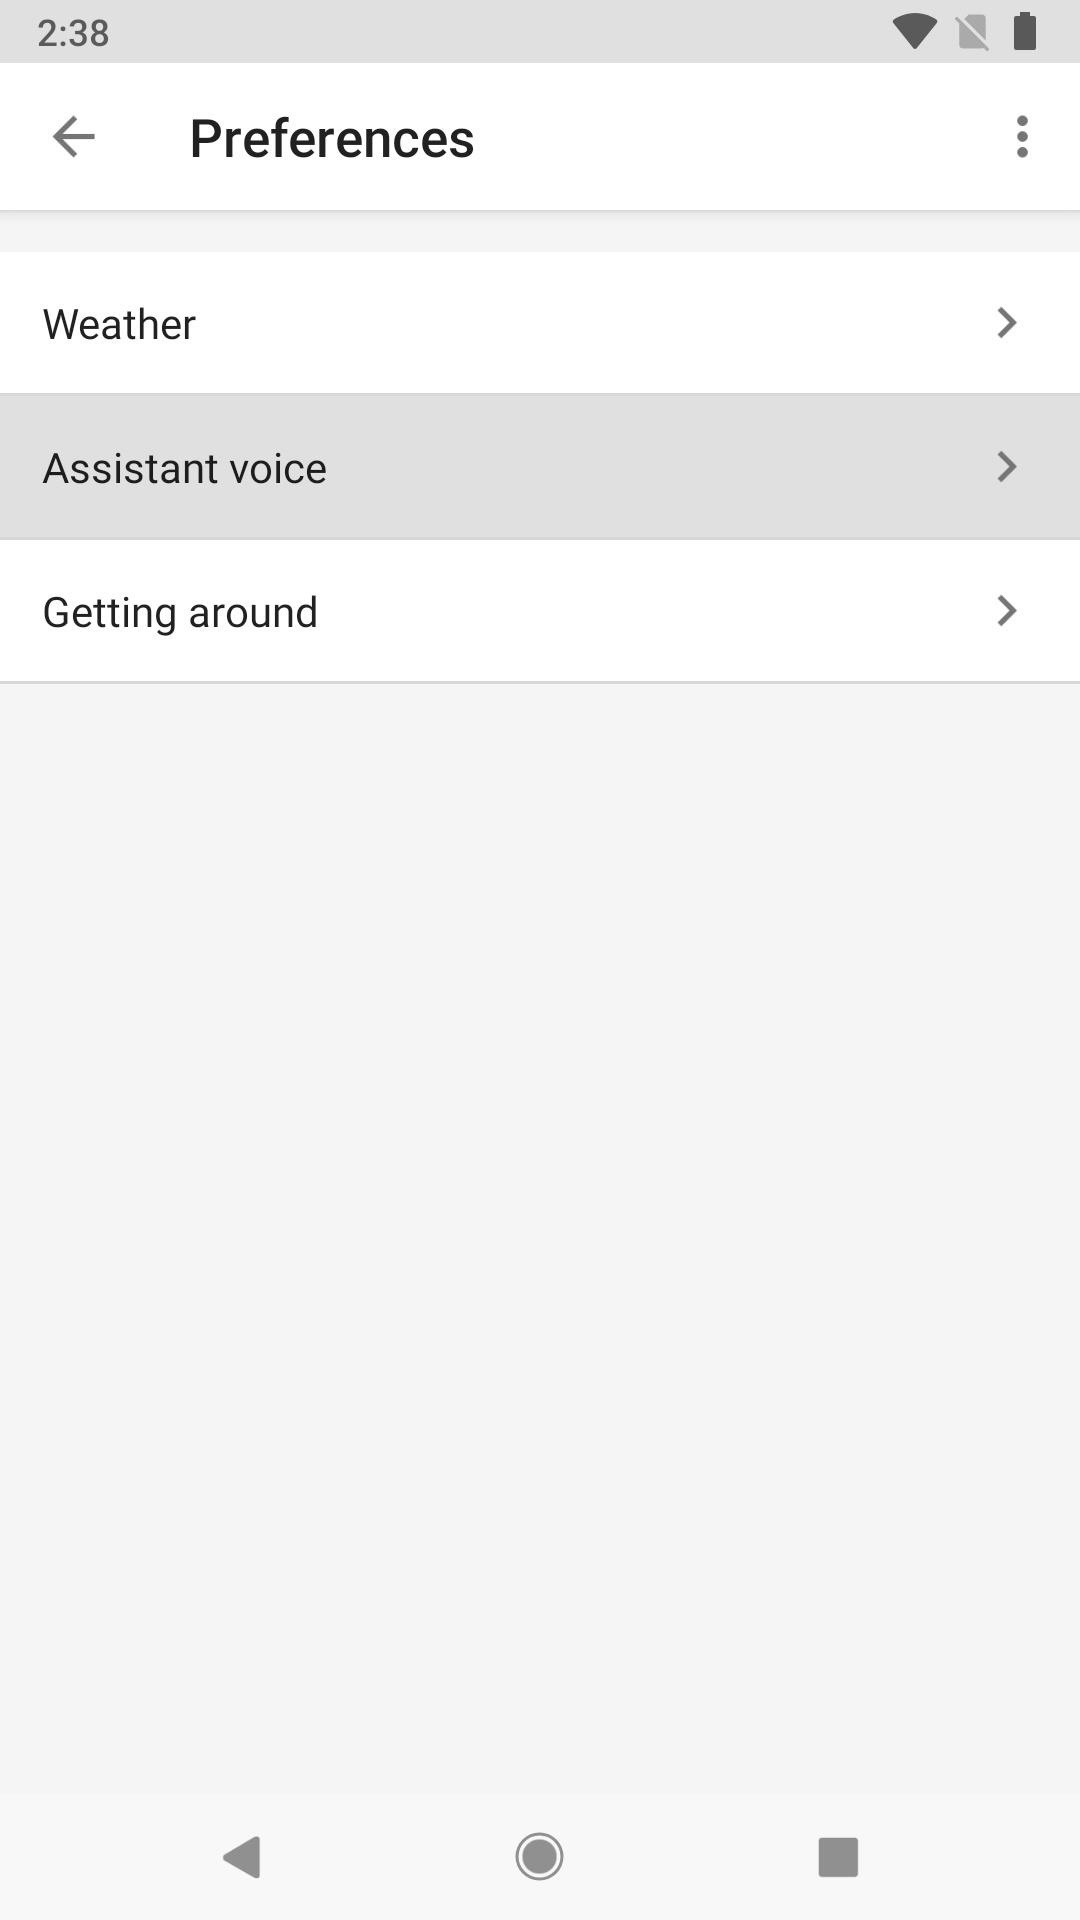 Google Assistant 101: How to Change the Voice on Android & iPhone to More Natural Male & Female Speakers